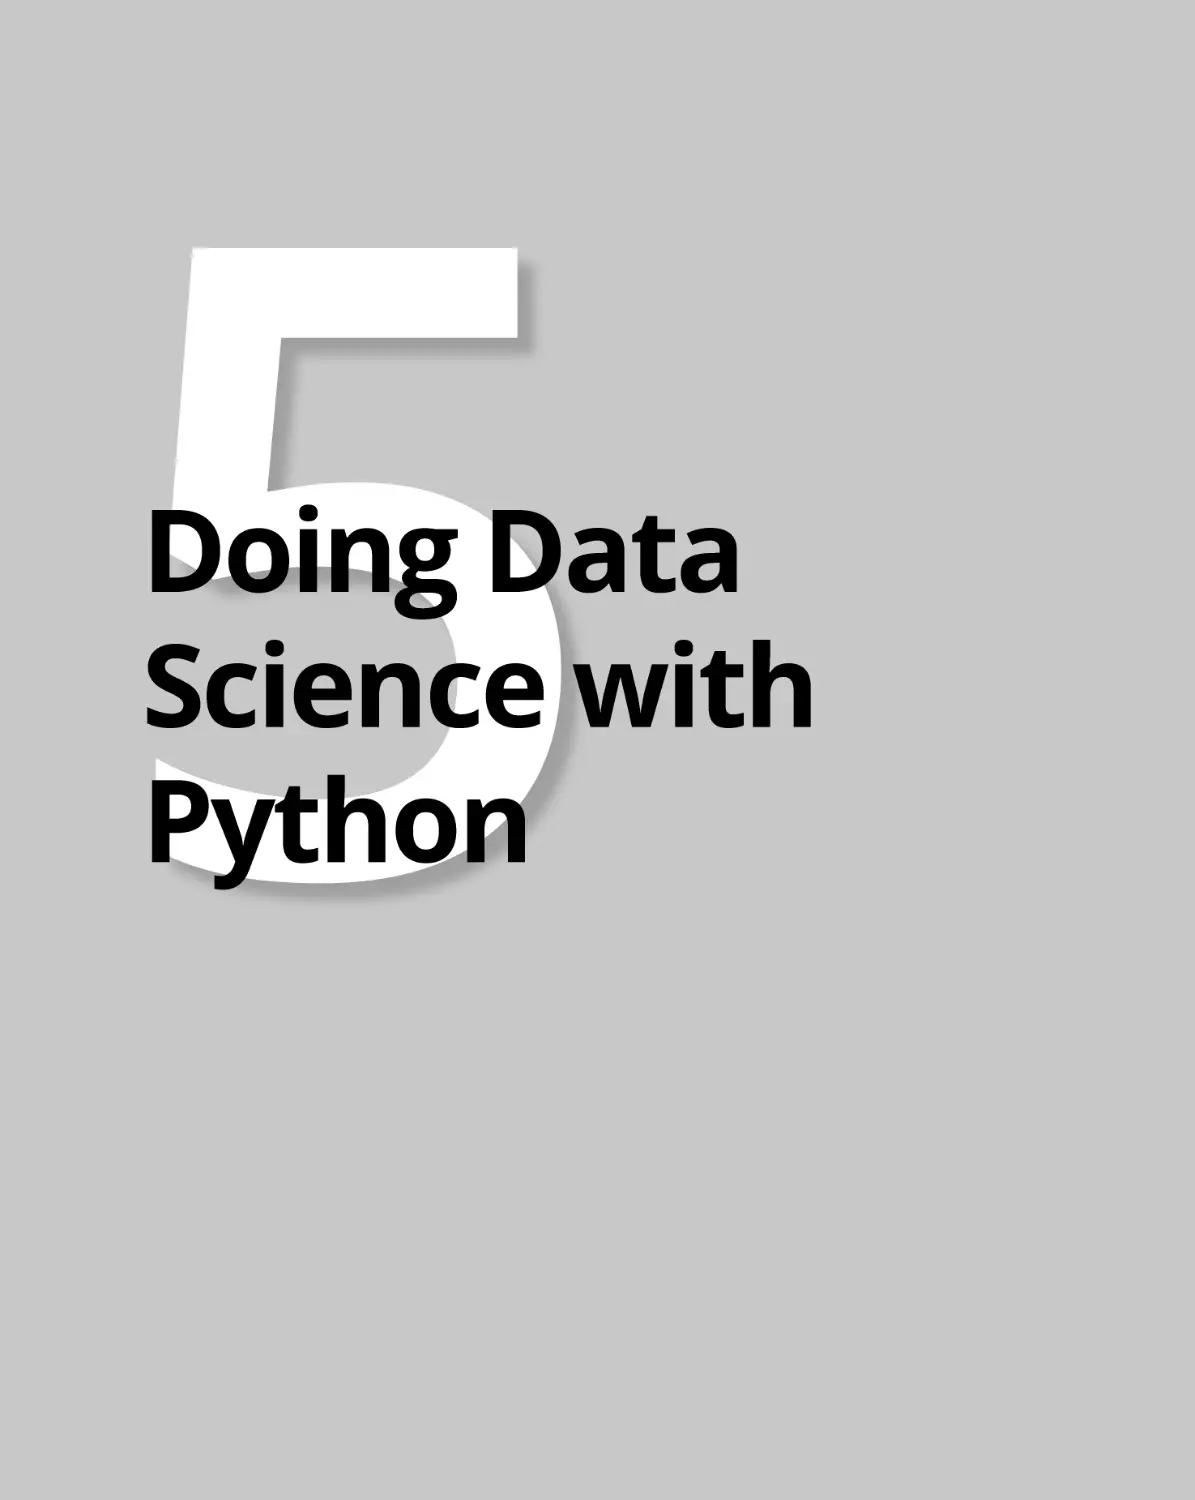 Book
5 Doing Data Science with Python